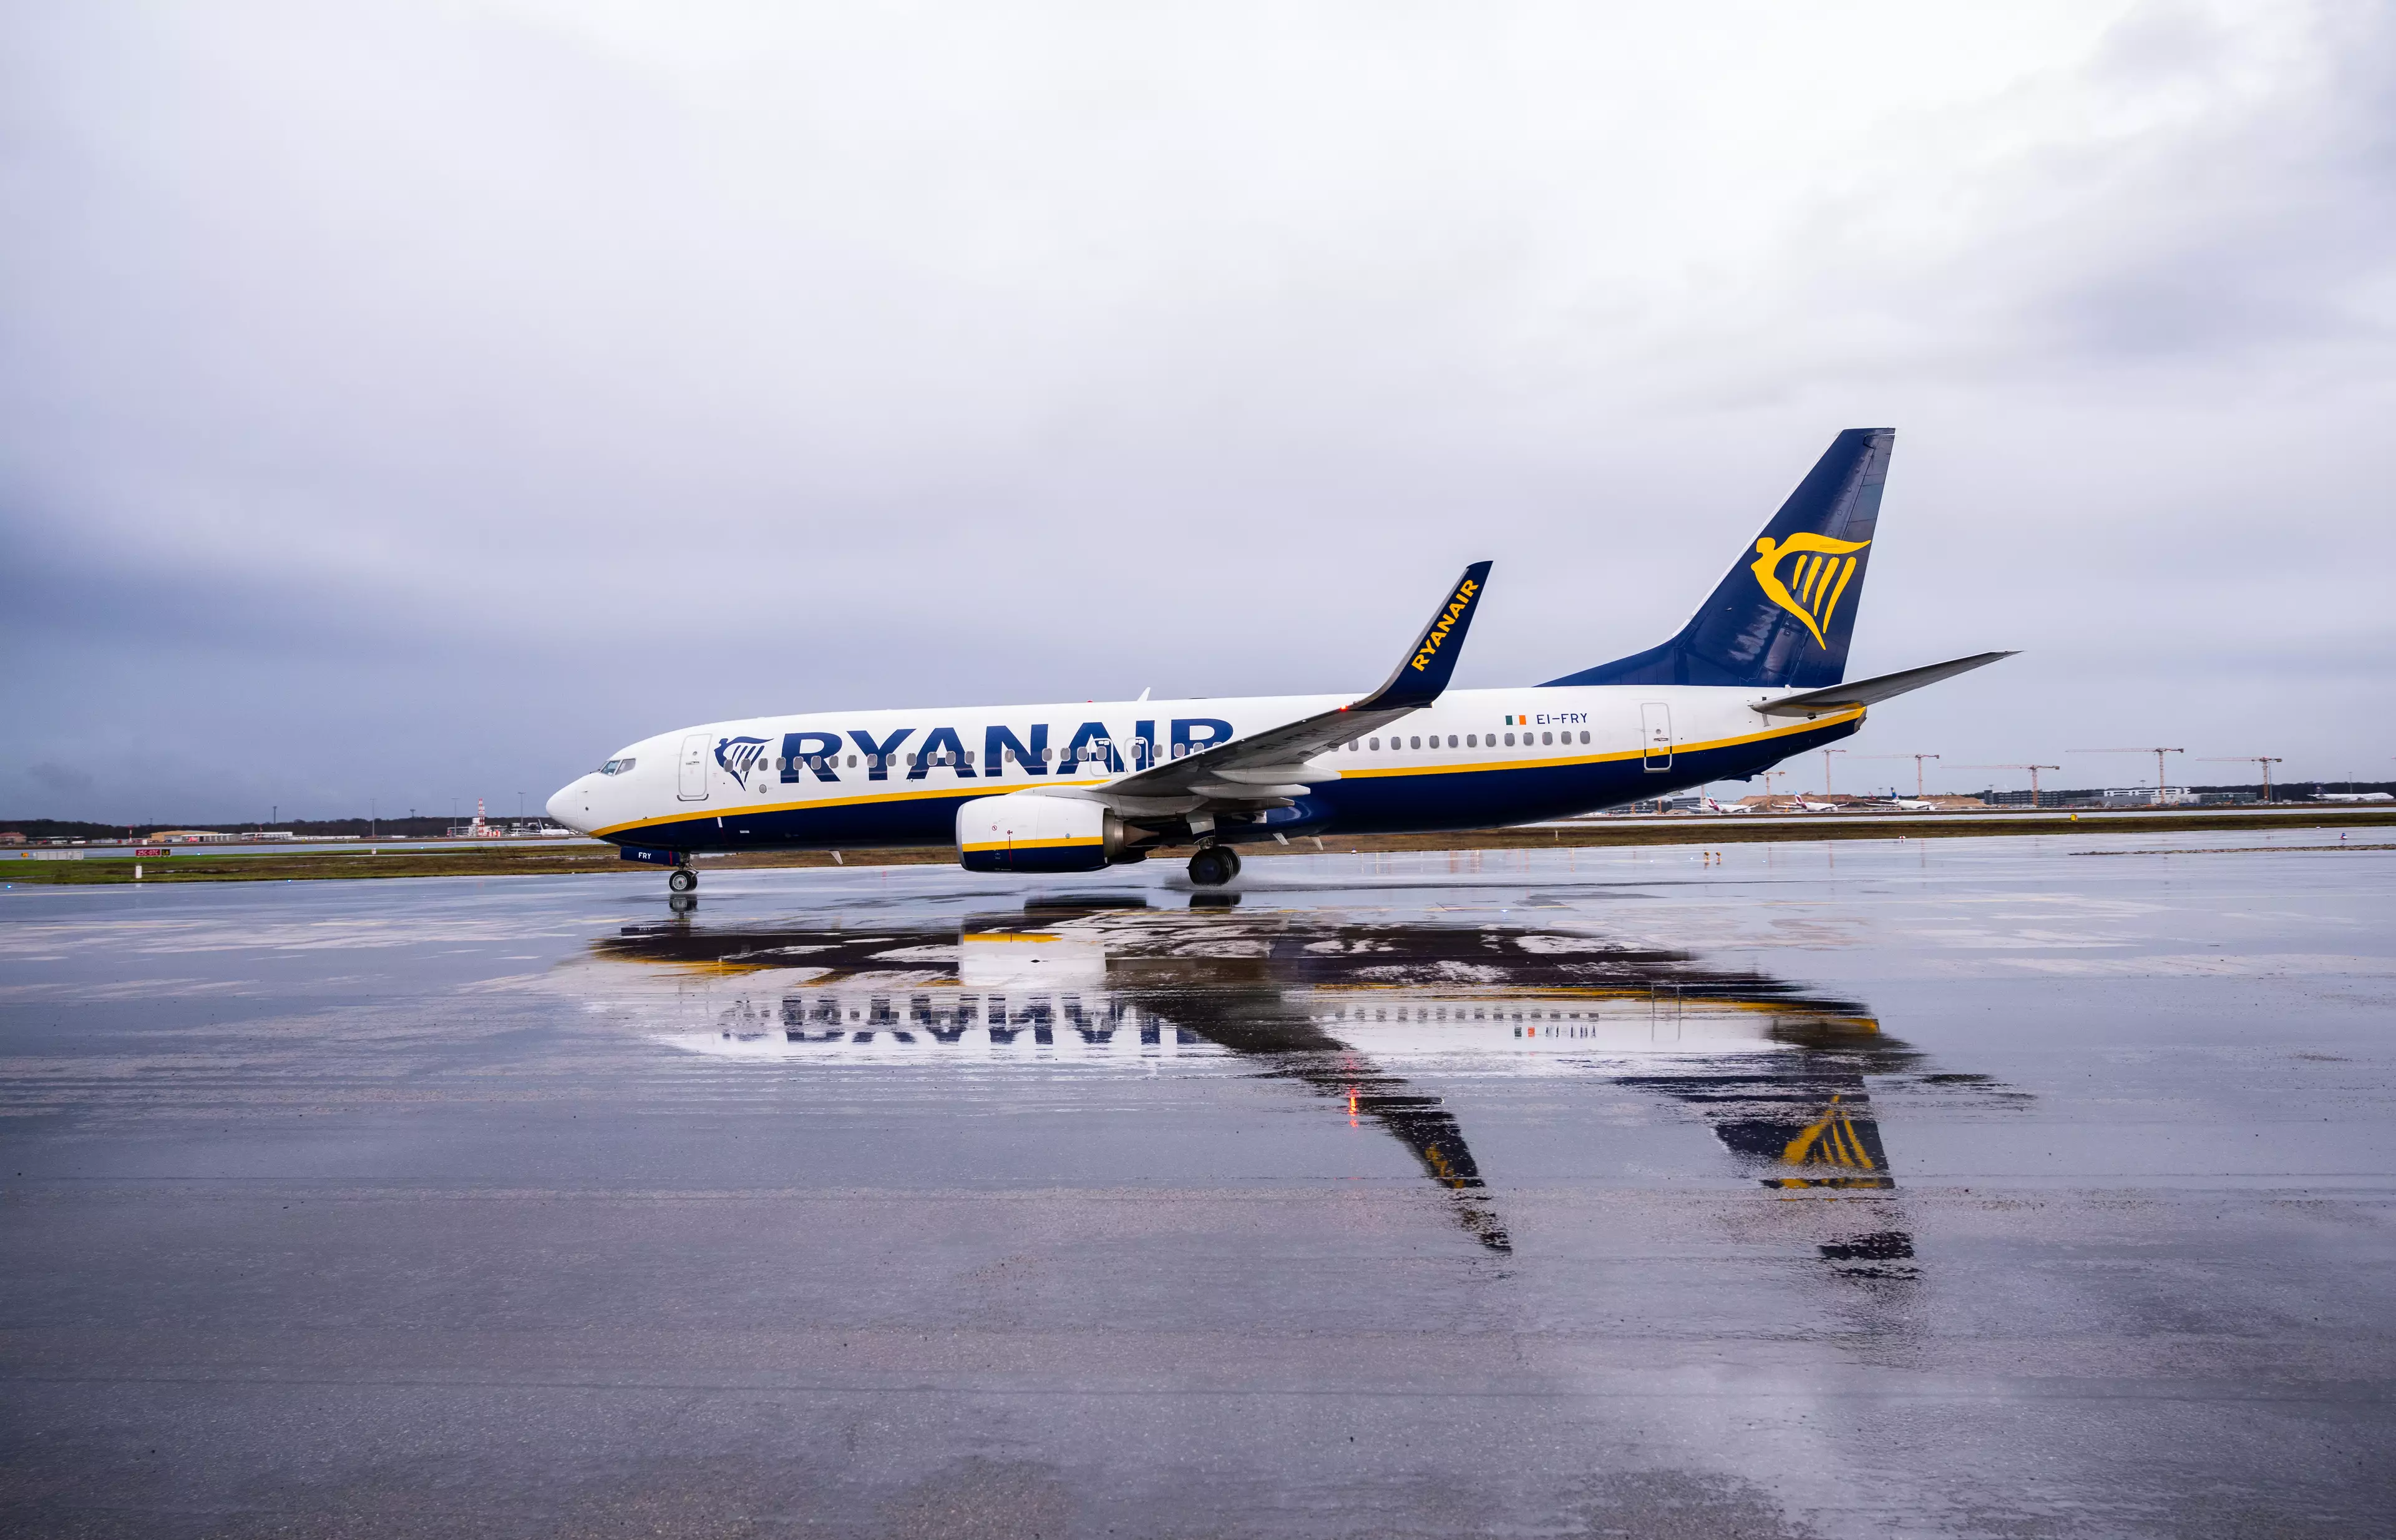 Ryanair has also cut a number of flights from its schedule (